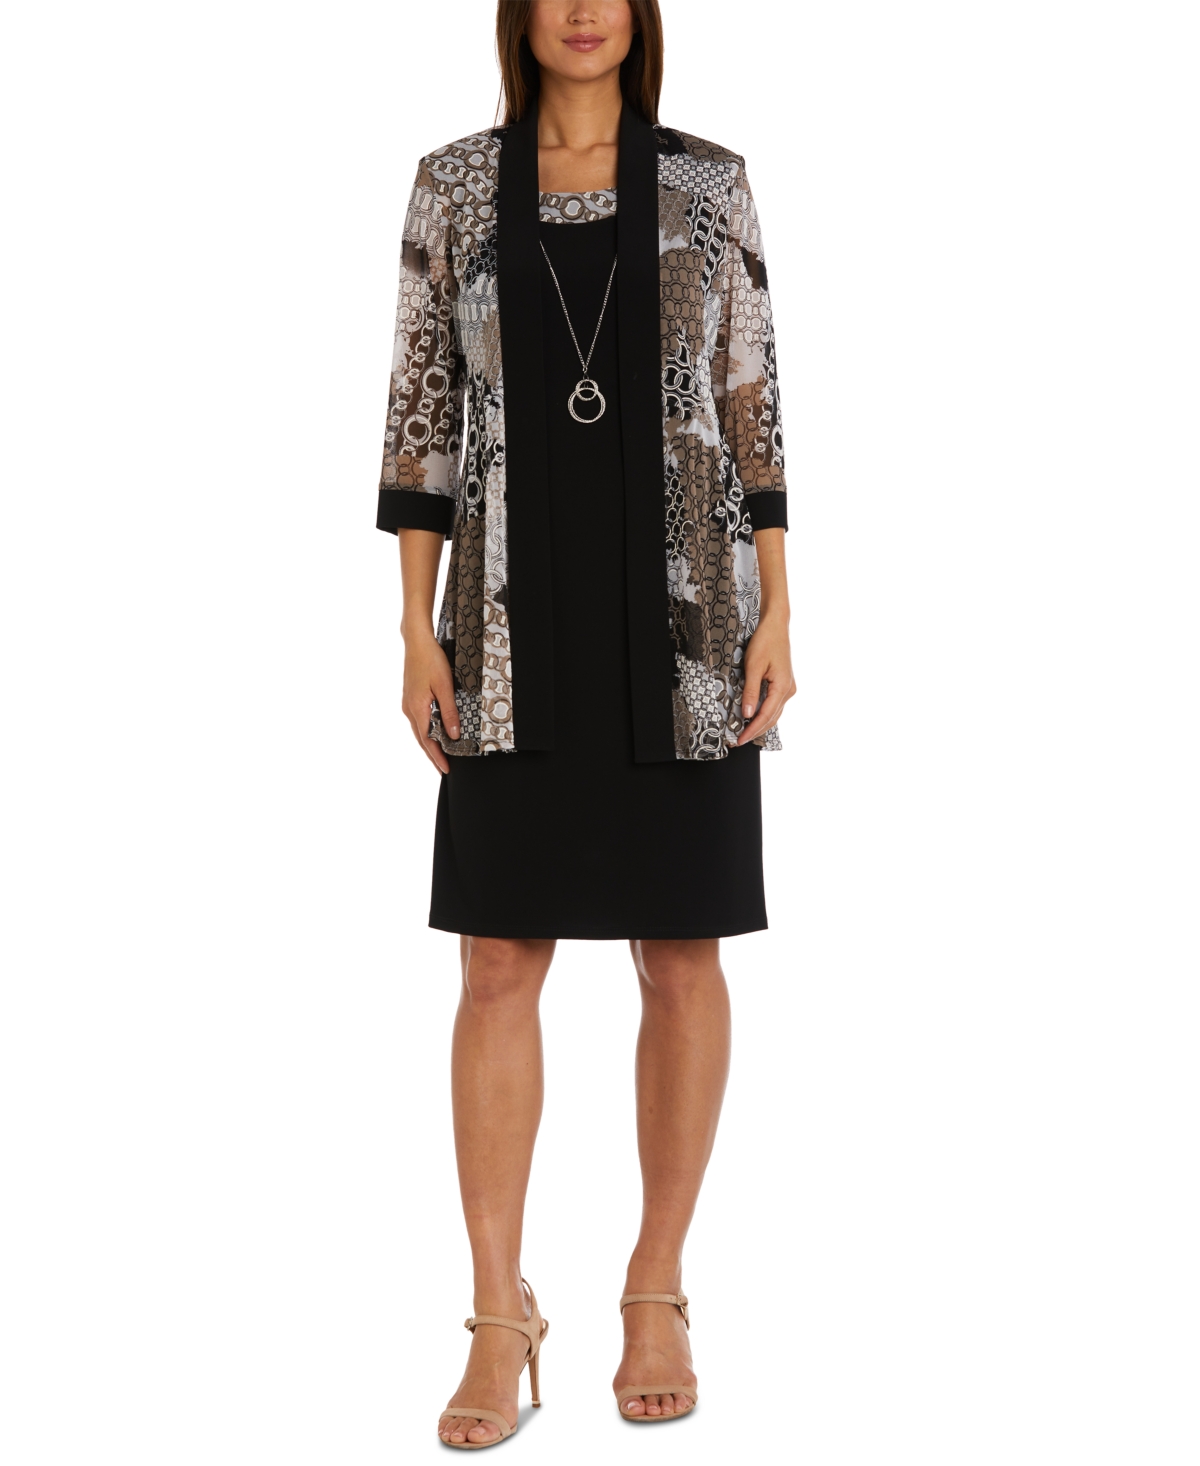 Women's Necklace Dress & Printed Jacket - Taupe/Black